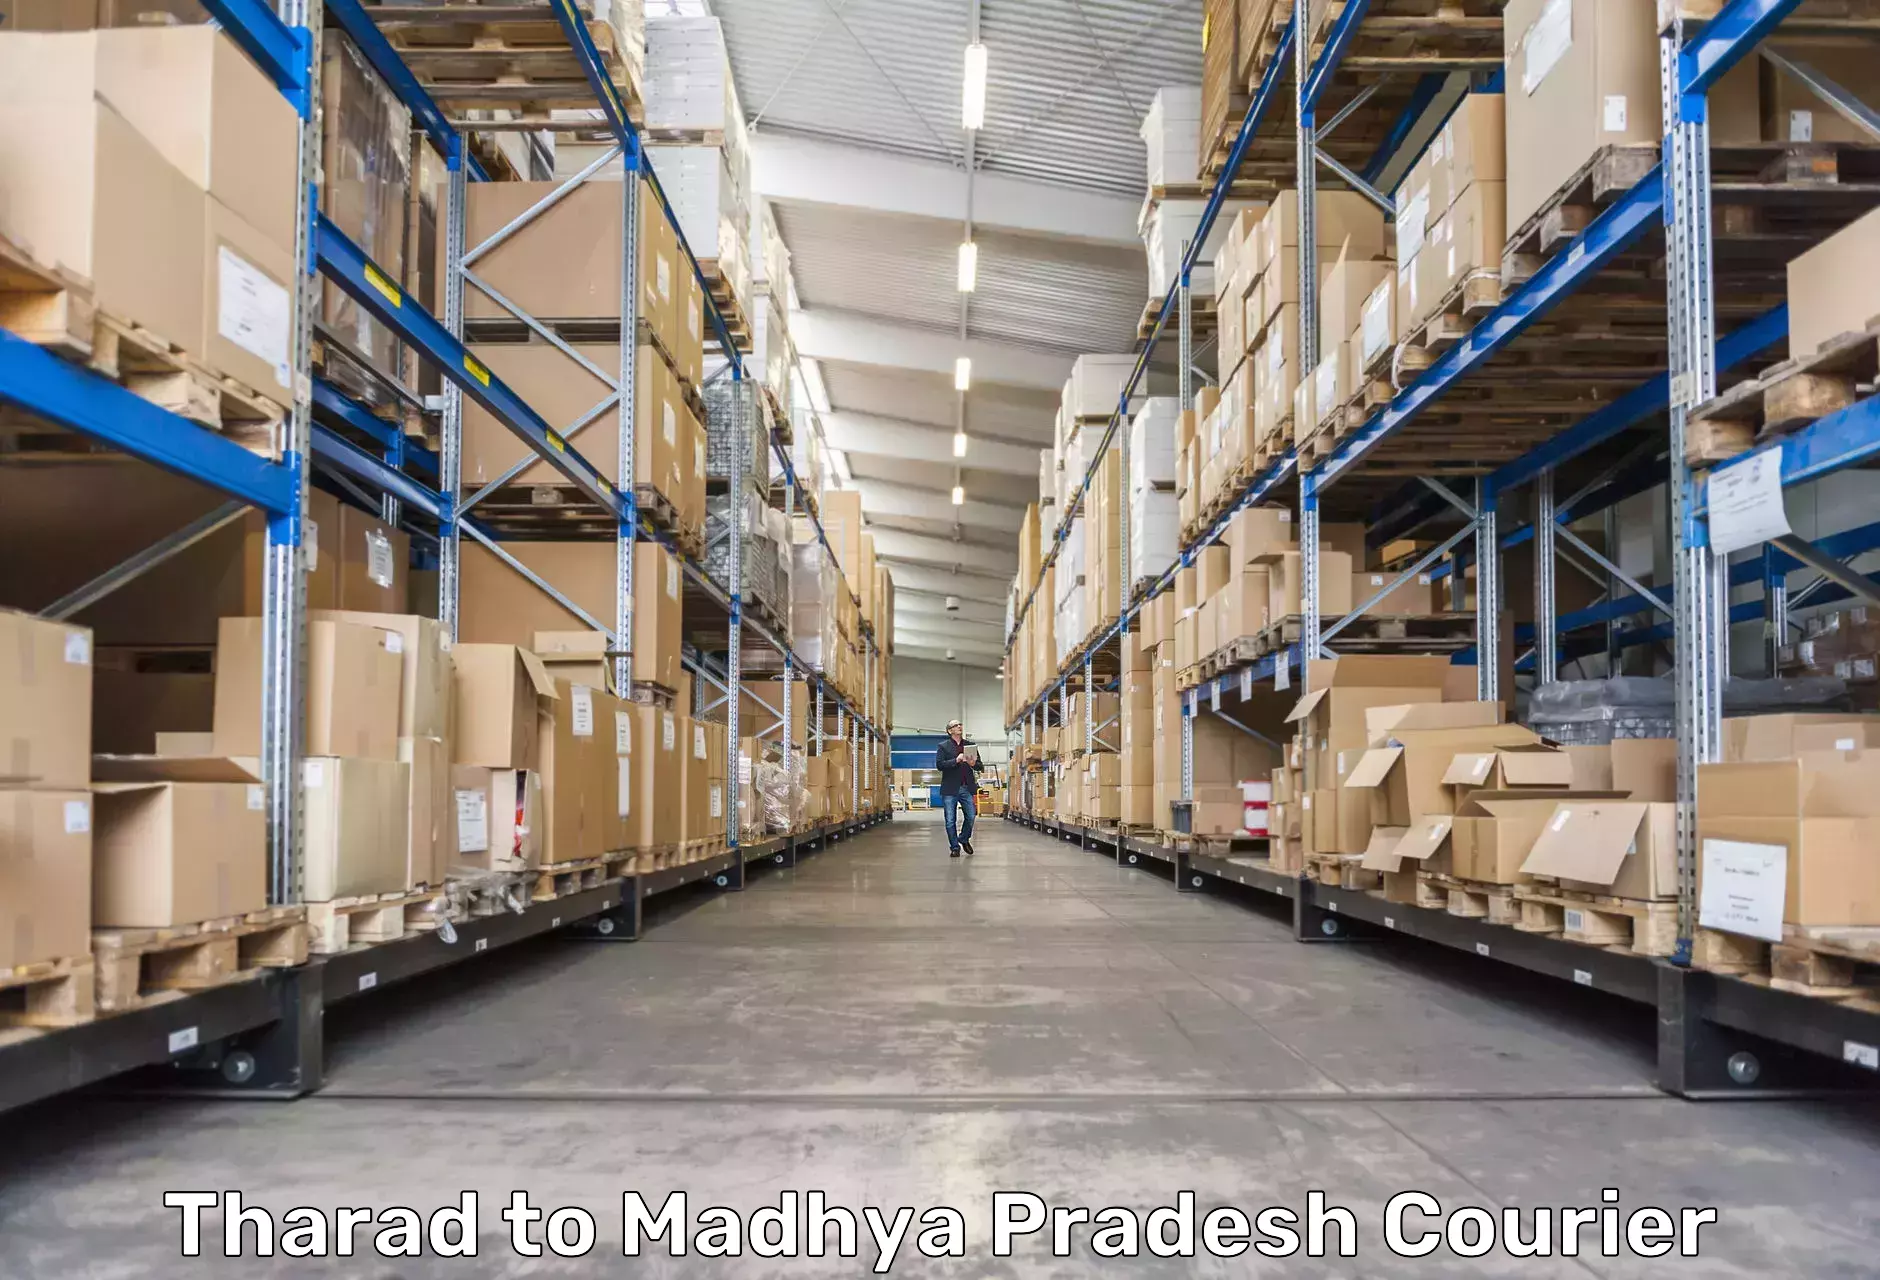 Professional courier services Tharad to Maheshwar